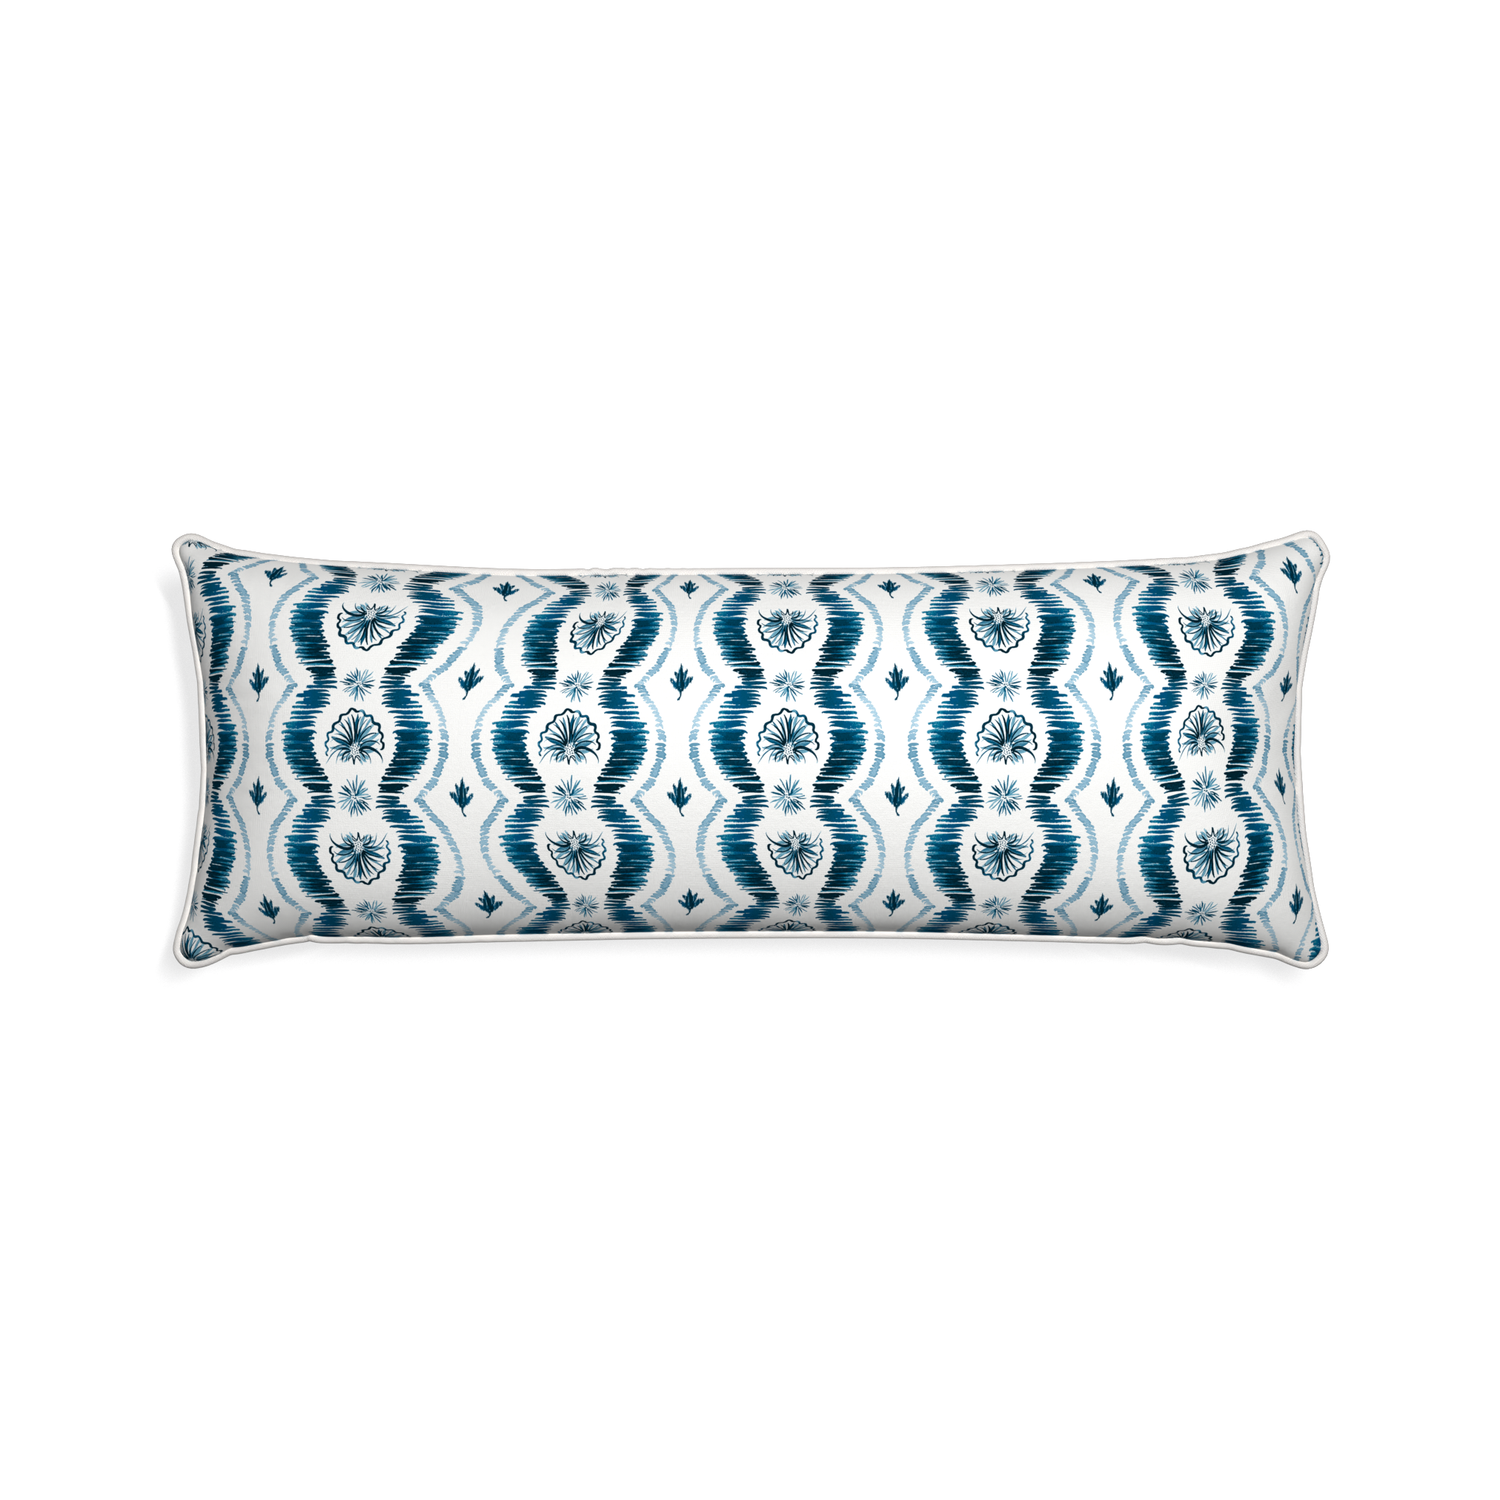 Xl-lumbar alice custom blue ikatpillow with snow piping on white background